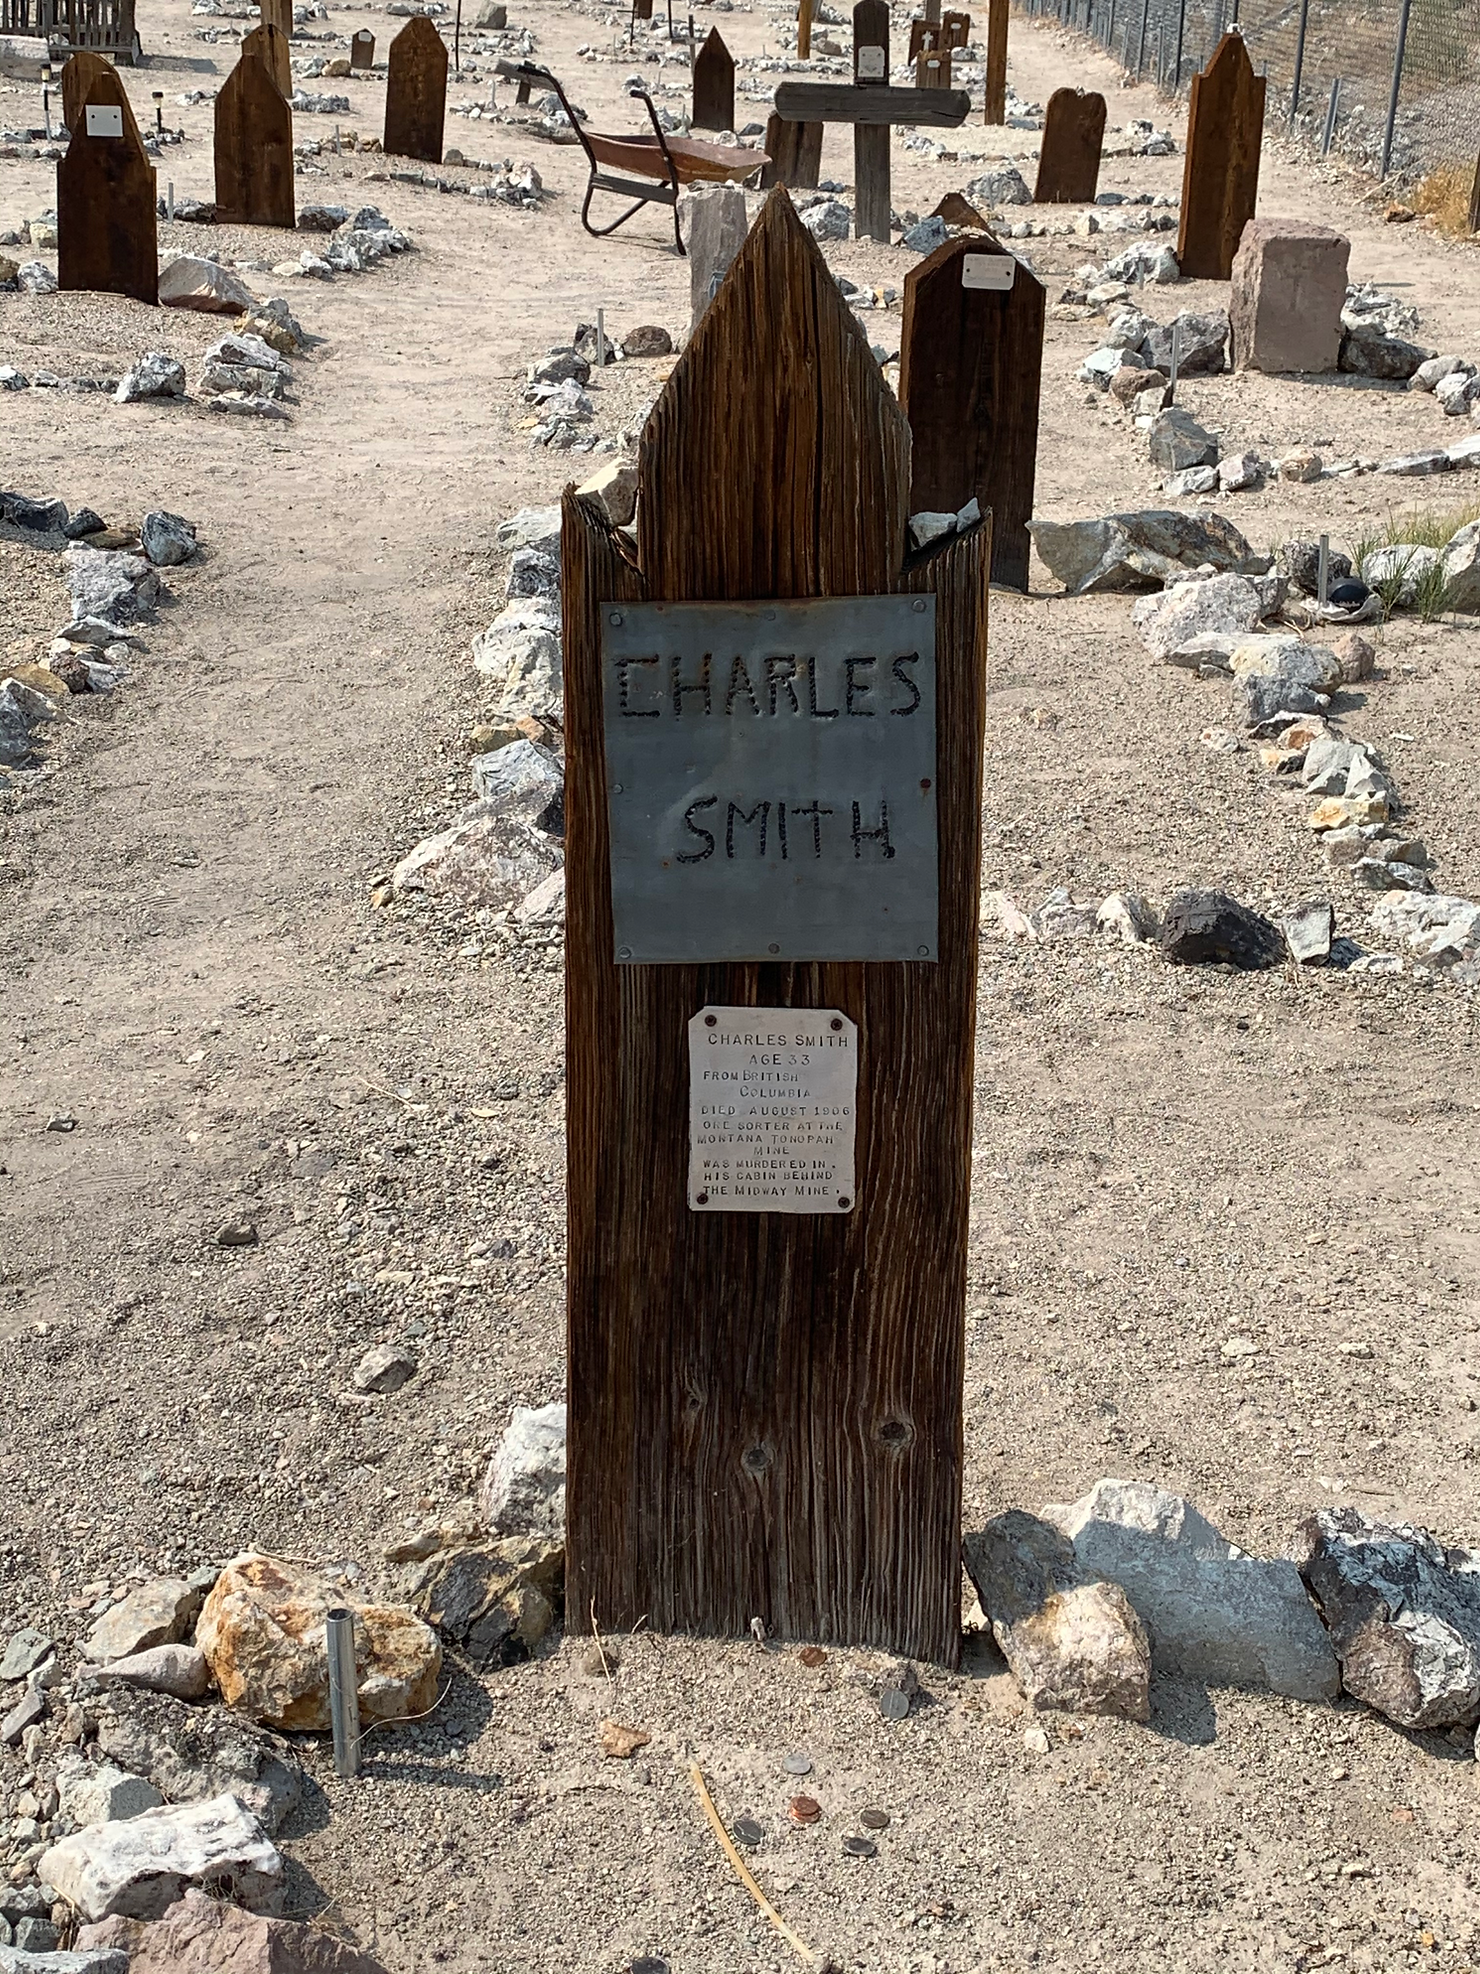 Gravemarker for Charles Smith mentioning his demise in Tonopah, Nevada